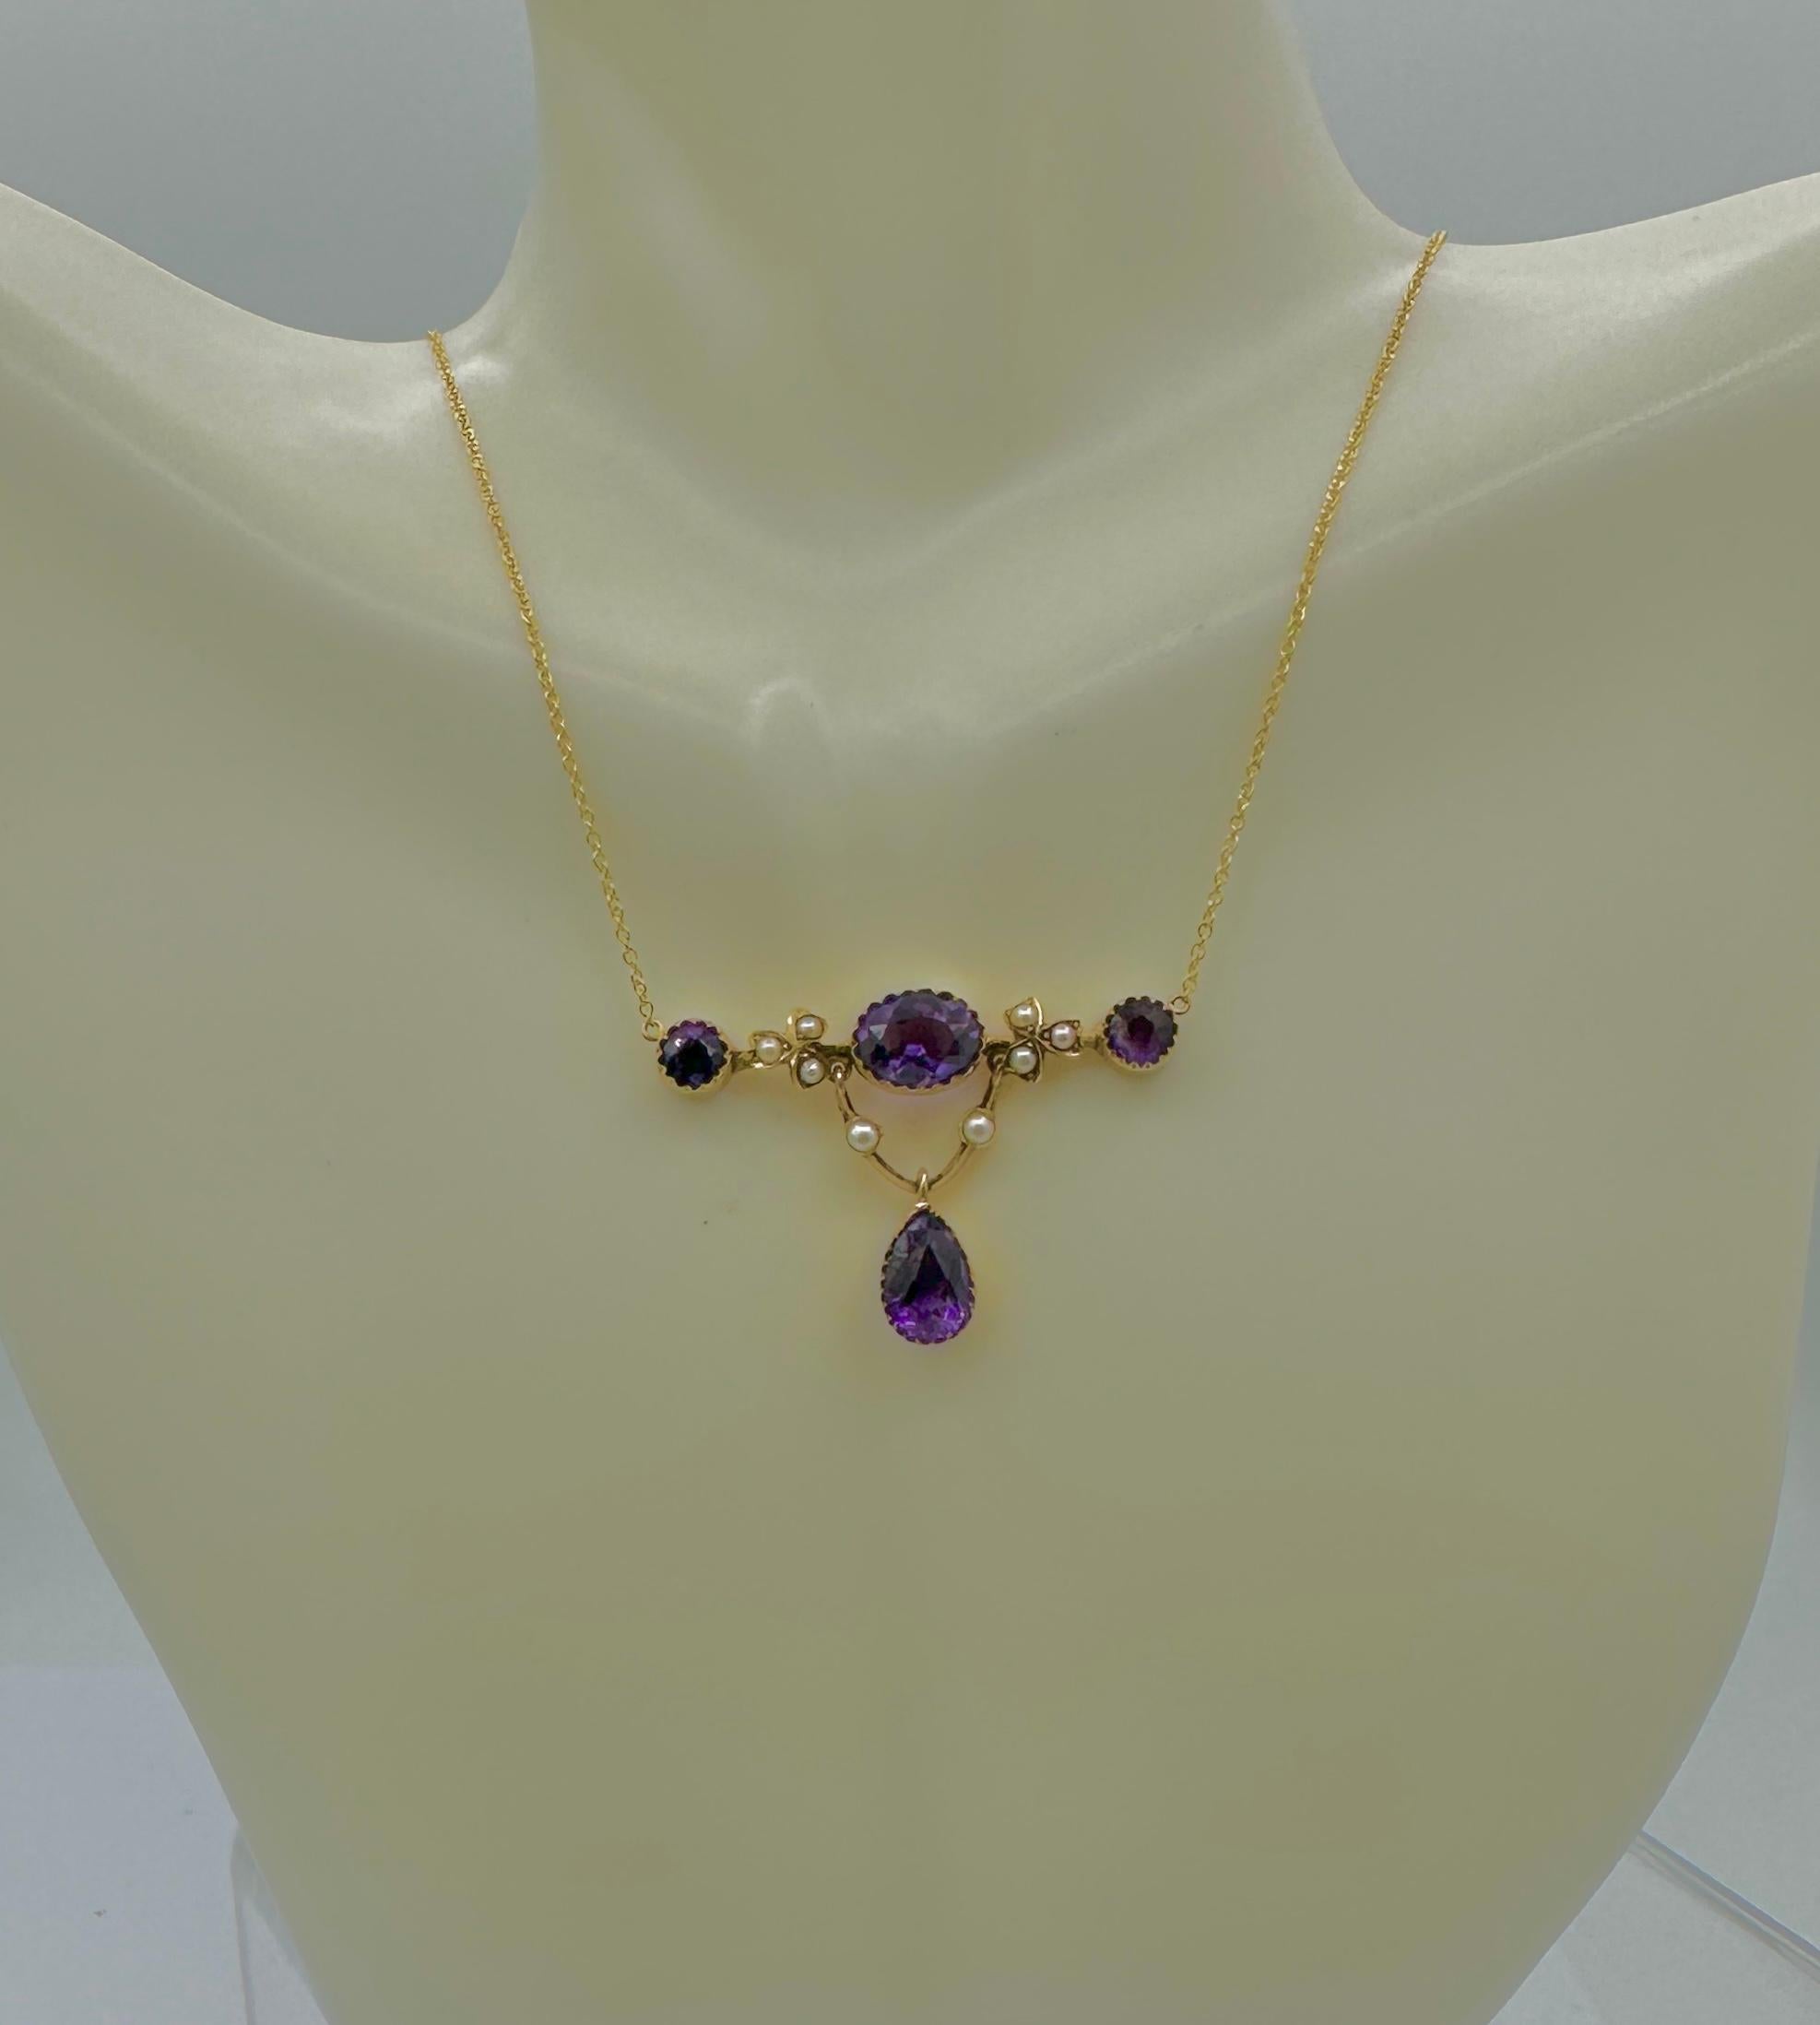 THIS IS A STUNNING ANTIQUE VICTORIAN - ART NOUVEAU - BELLE EPOQUE NECKLACE WITH THE MOST GORGEOUS NATURAL PEAR SHAPE, OVAL AND ROUND FACETED SIBERIAN AMETHYST GEMS.  THE AMETHYSTS ARE SET IN A WONDERFUL CLOVER FLOWER MOTIF PENDANT WITH A PEAR SHAPE